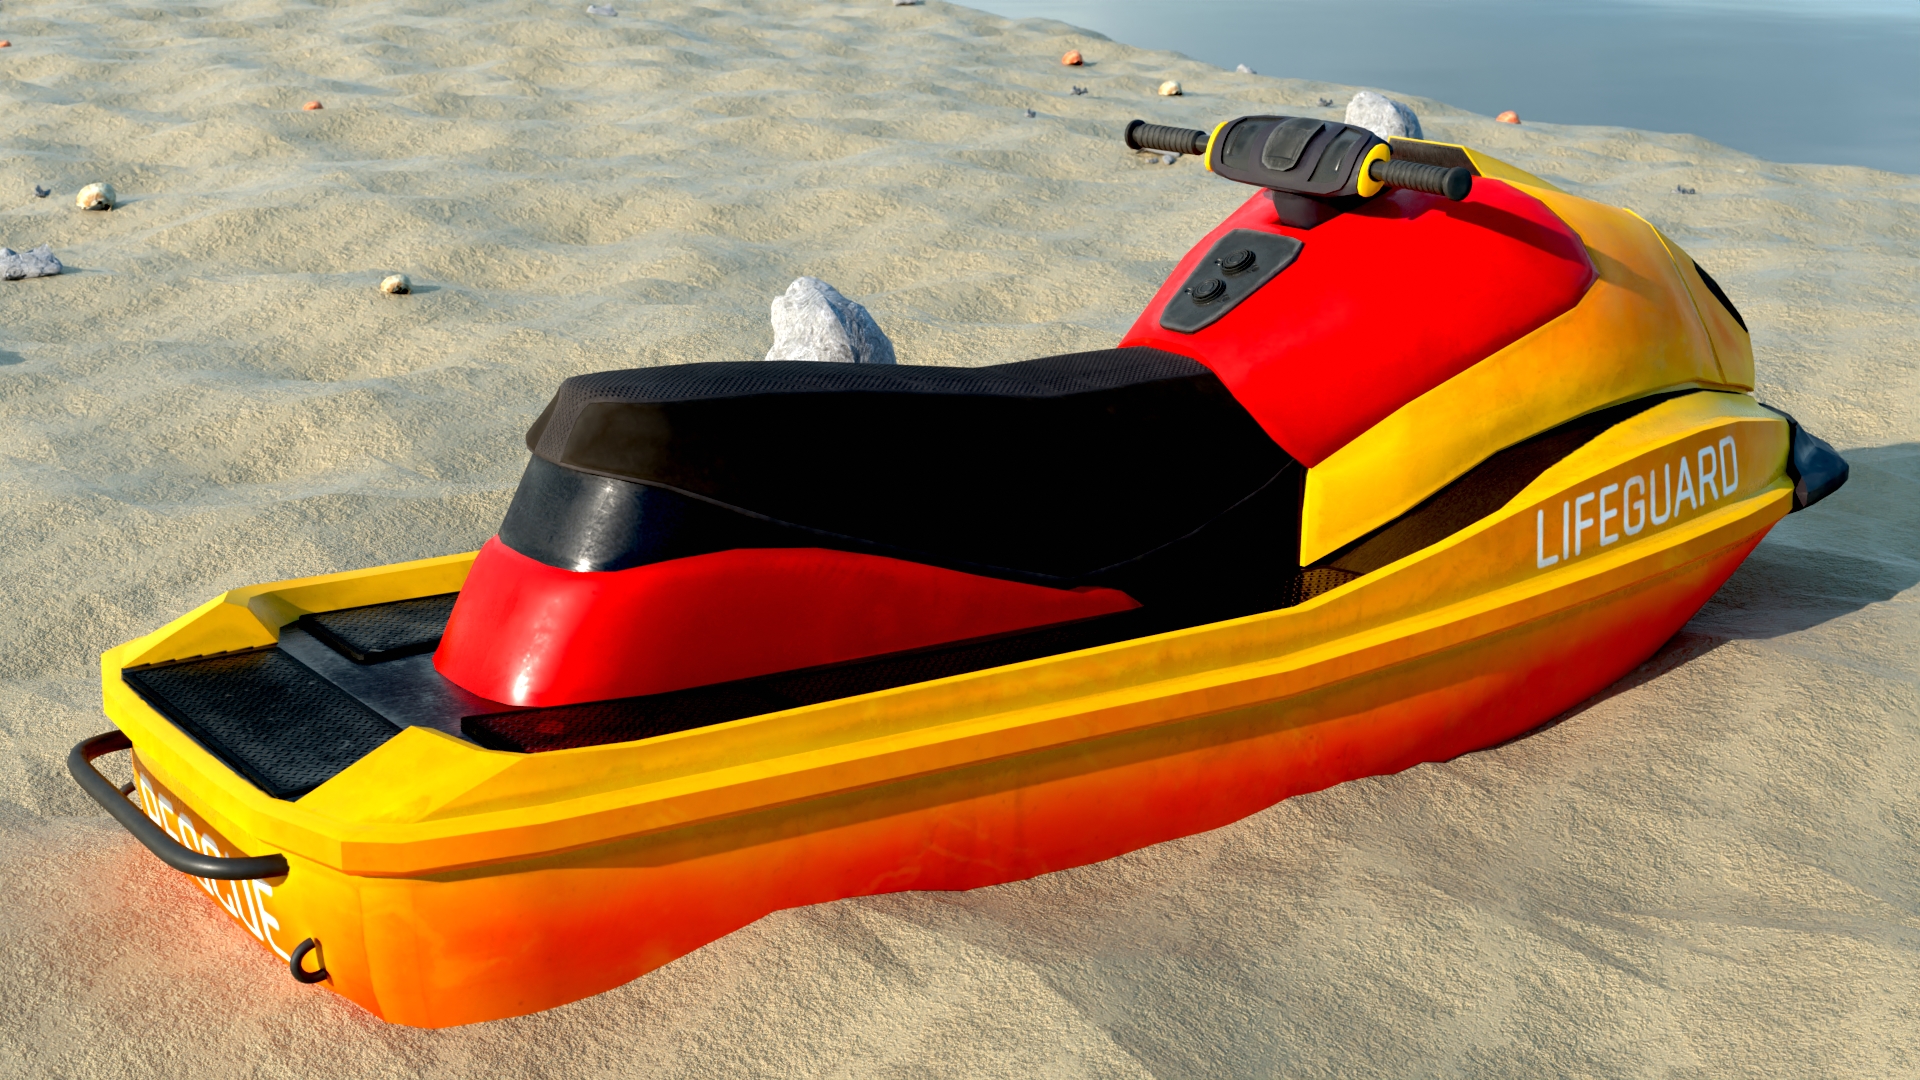 essens adelig stadig Rescue Jet Ski Water scooter Aquabike Hydrocycle Jet boat by Atlant3D